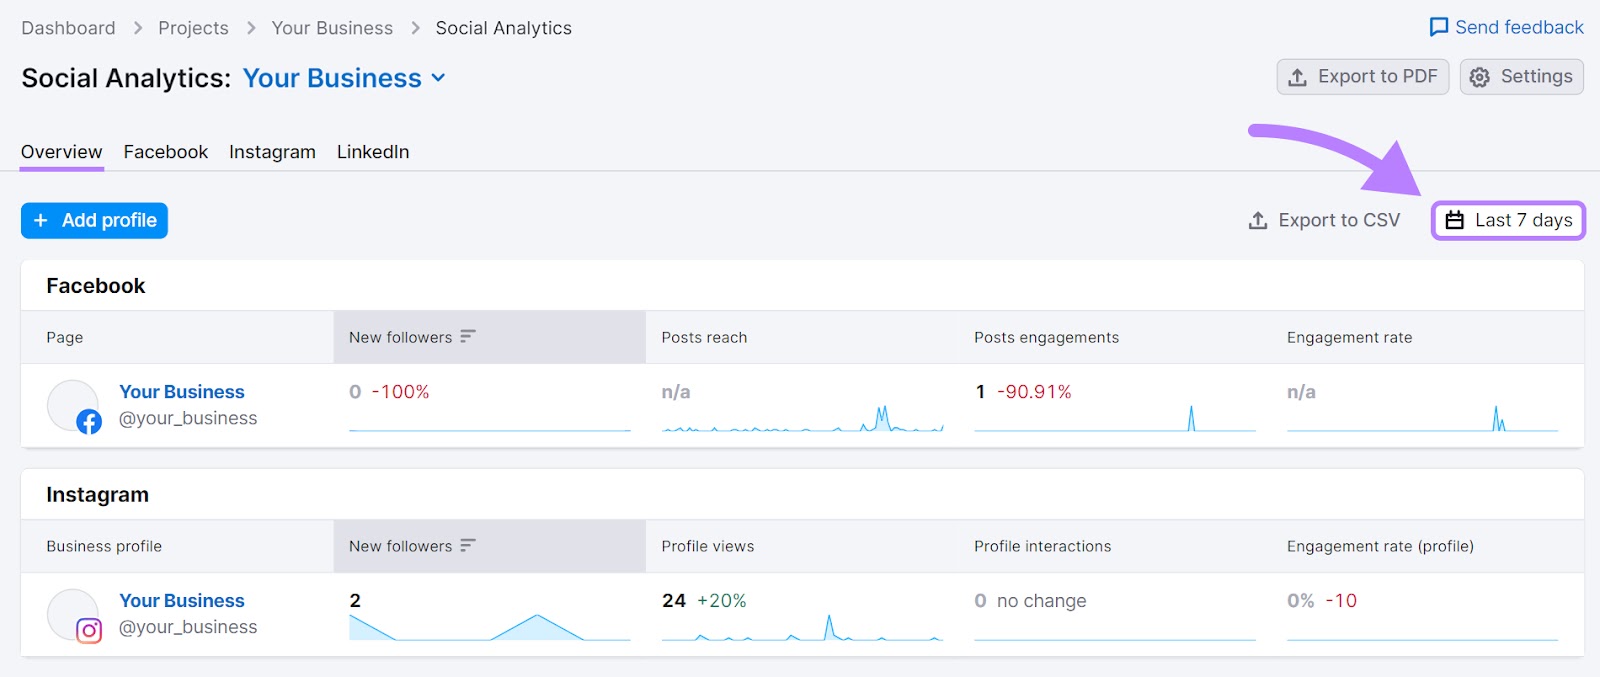 Social Analytics overview dashboard showing information  for the past  7 days